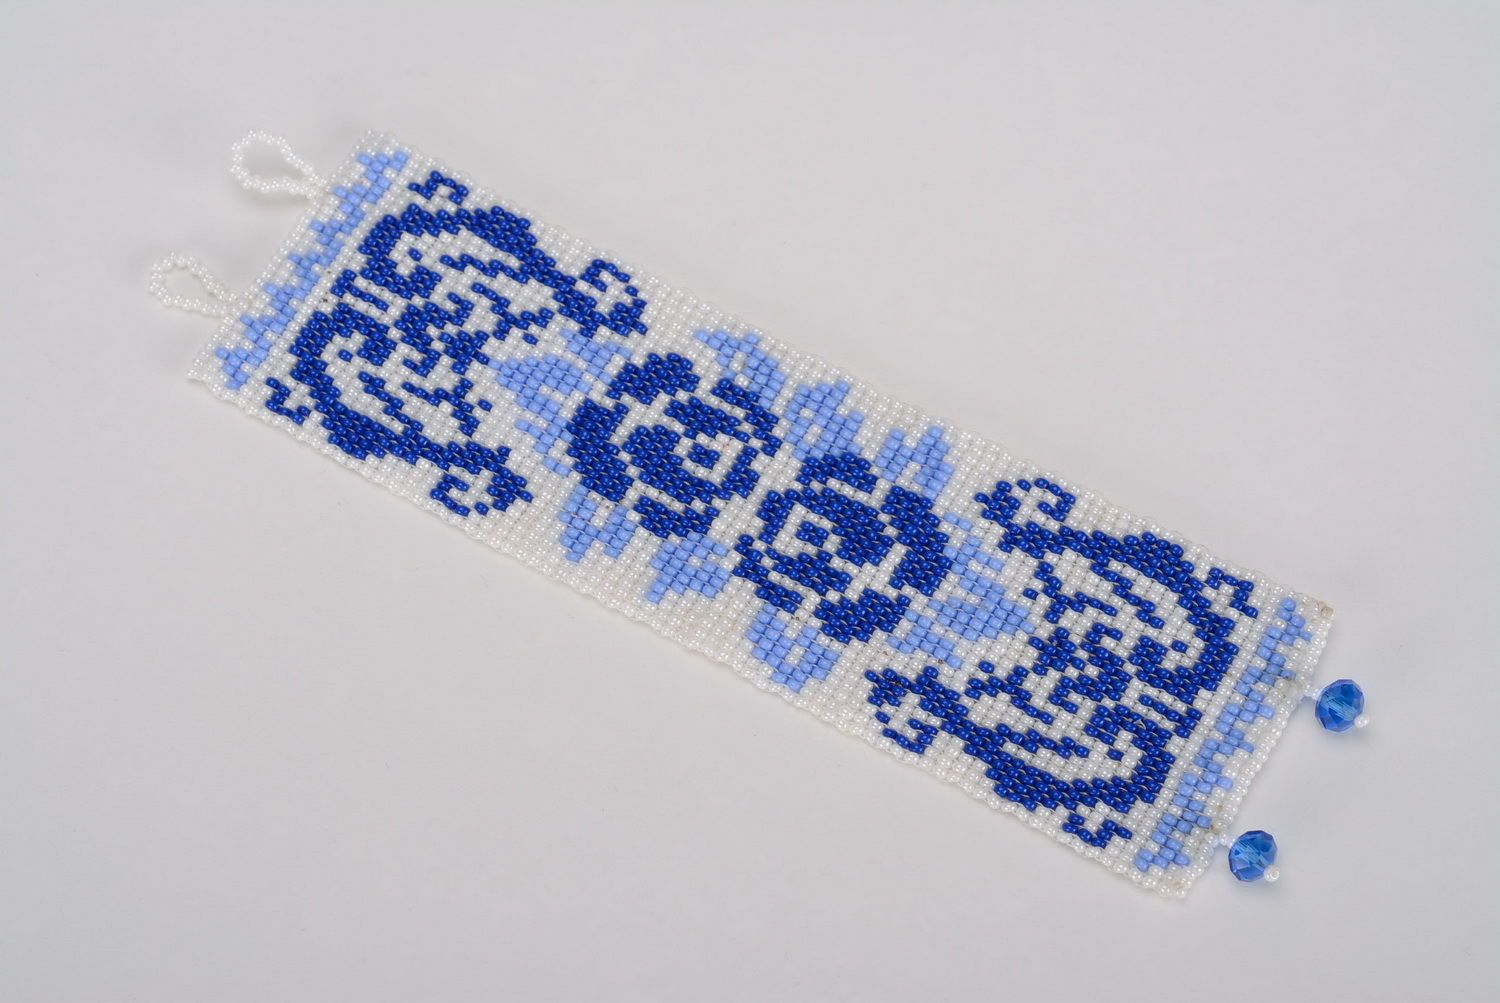 Bracelet with blue flowers, made of Czech beads photo 2